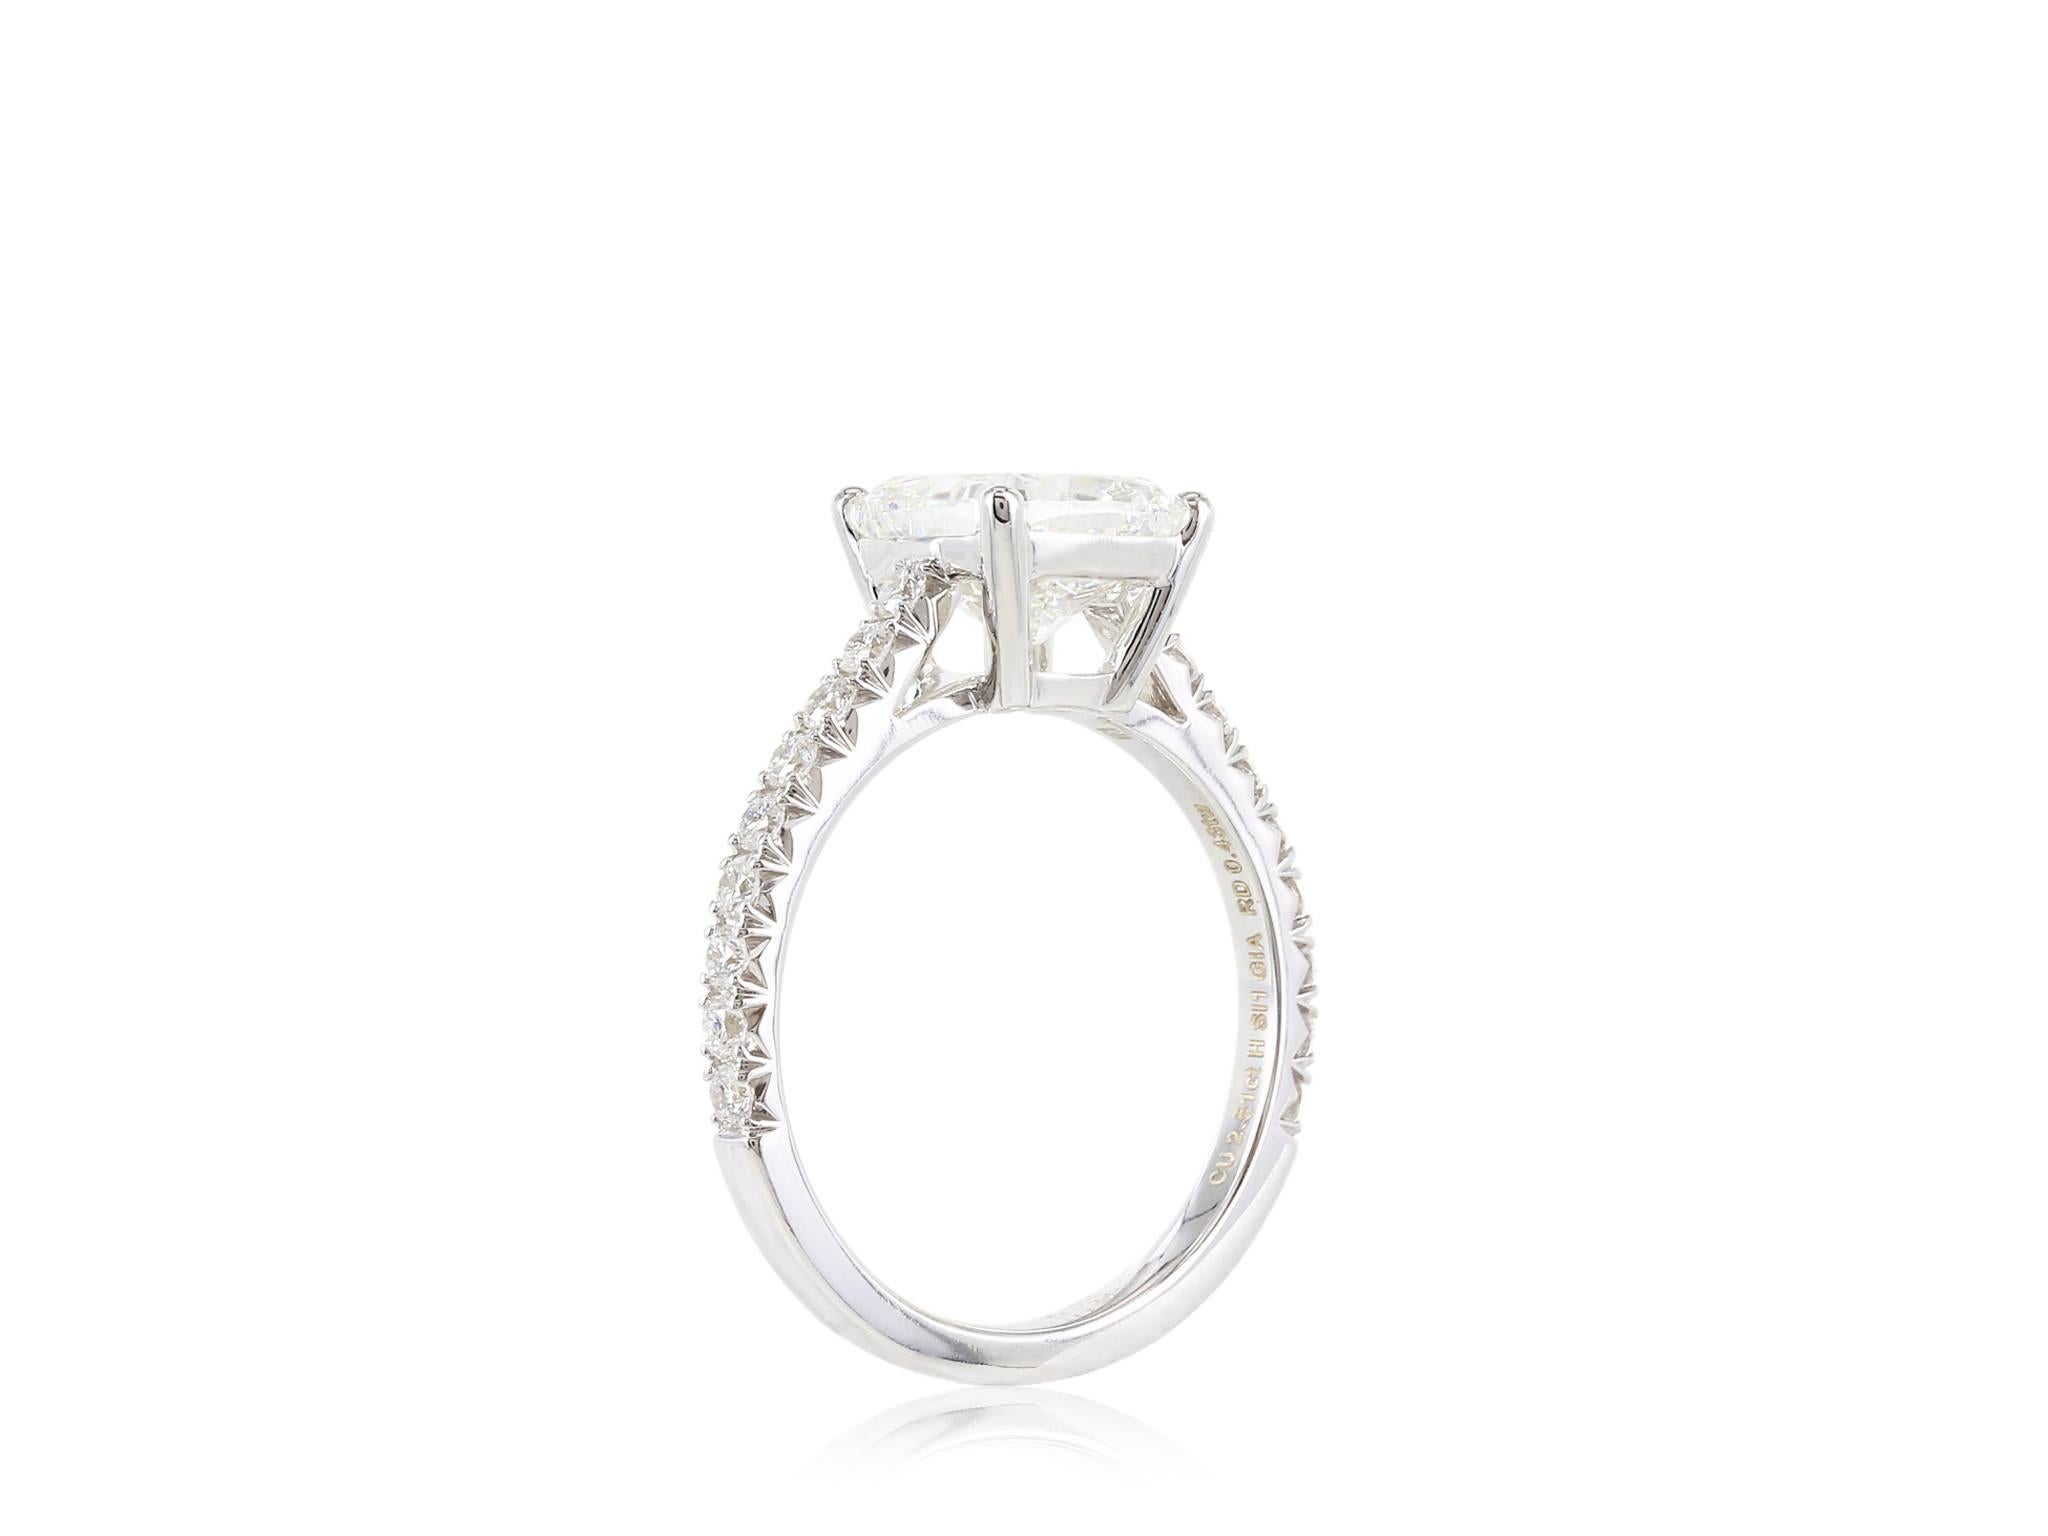 18 karat white gold consisting of 1 cushion cut diamond weighing 2.51 carats with a color and clarity H, SI1, GIA report # 1142733052, 7.90 x 7.50 x 4.99mm solitaire engagment ring.